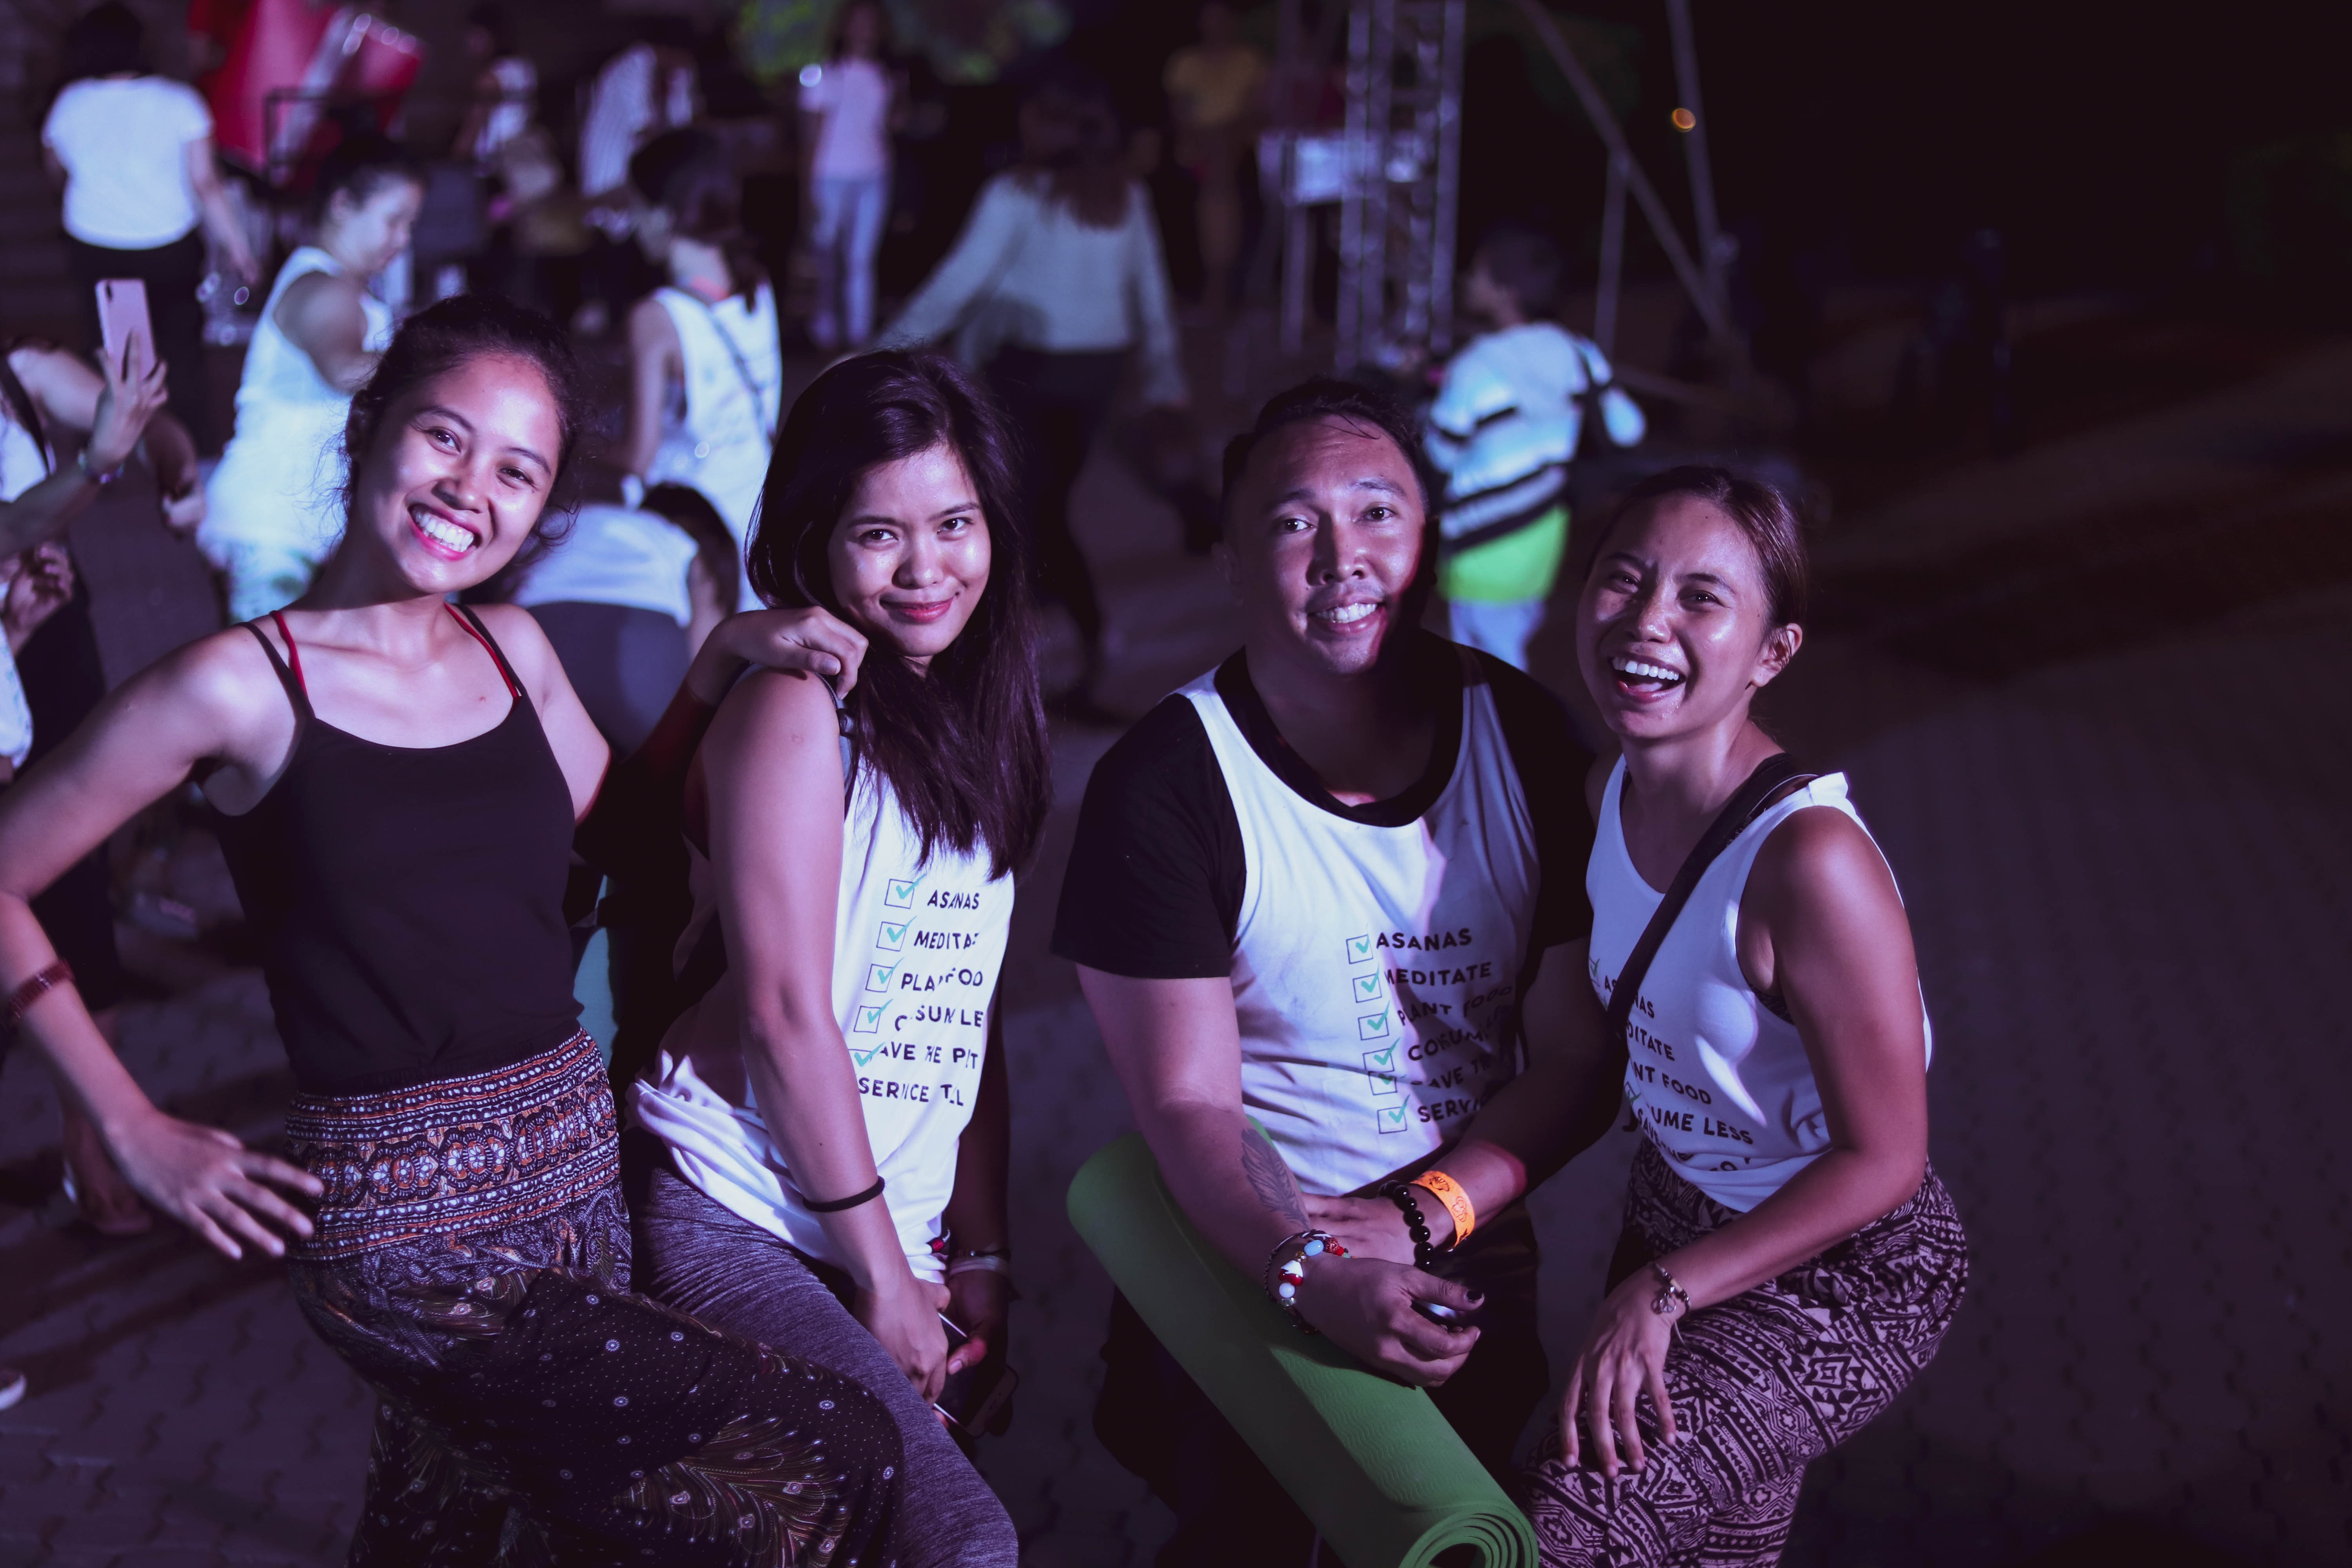 image of 4 young asian women posing for the camera together smiling and laughing. they are at a concert at nighttime and are under a light.